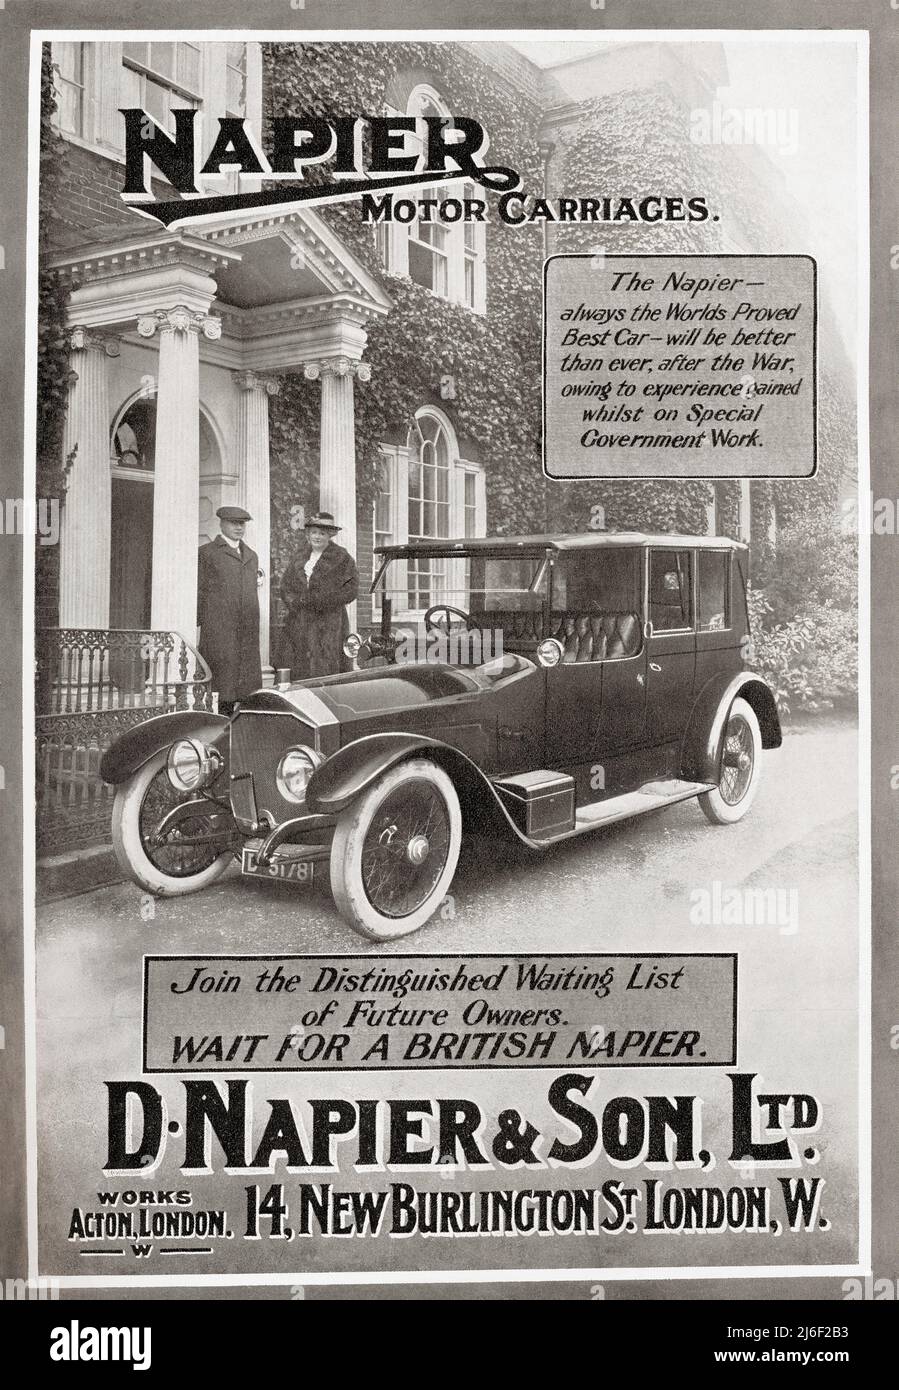 An advertisement for Napier Motor Carriages.  From The Connoisseur Illustrated, Sept-Dec 1916. Stock Photo